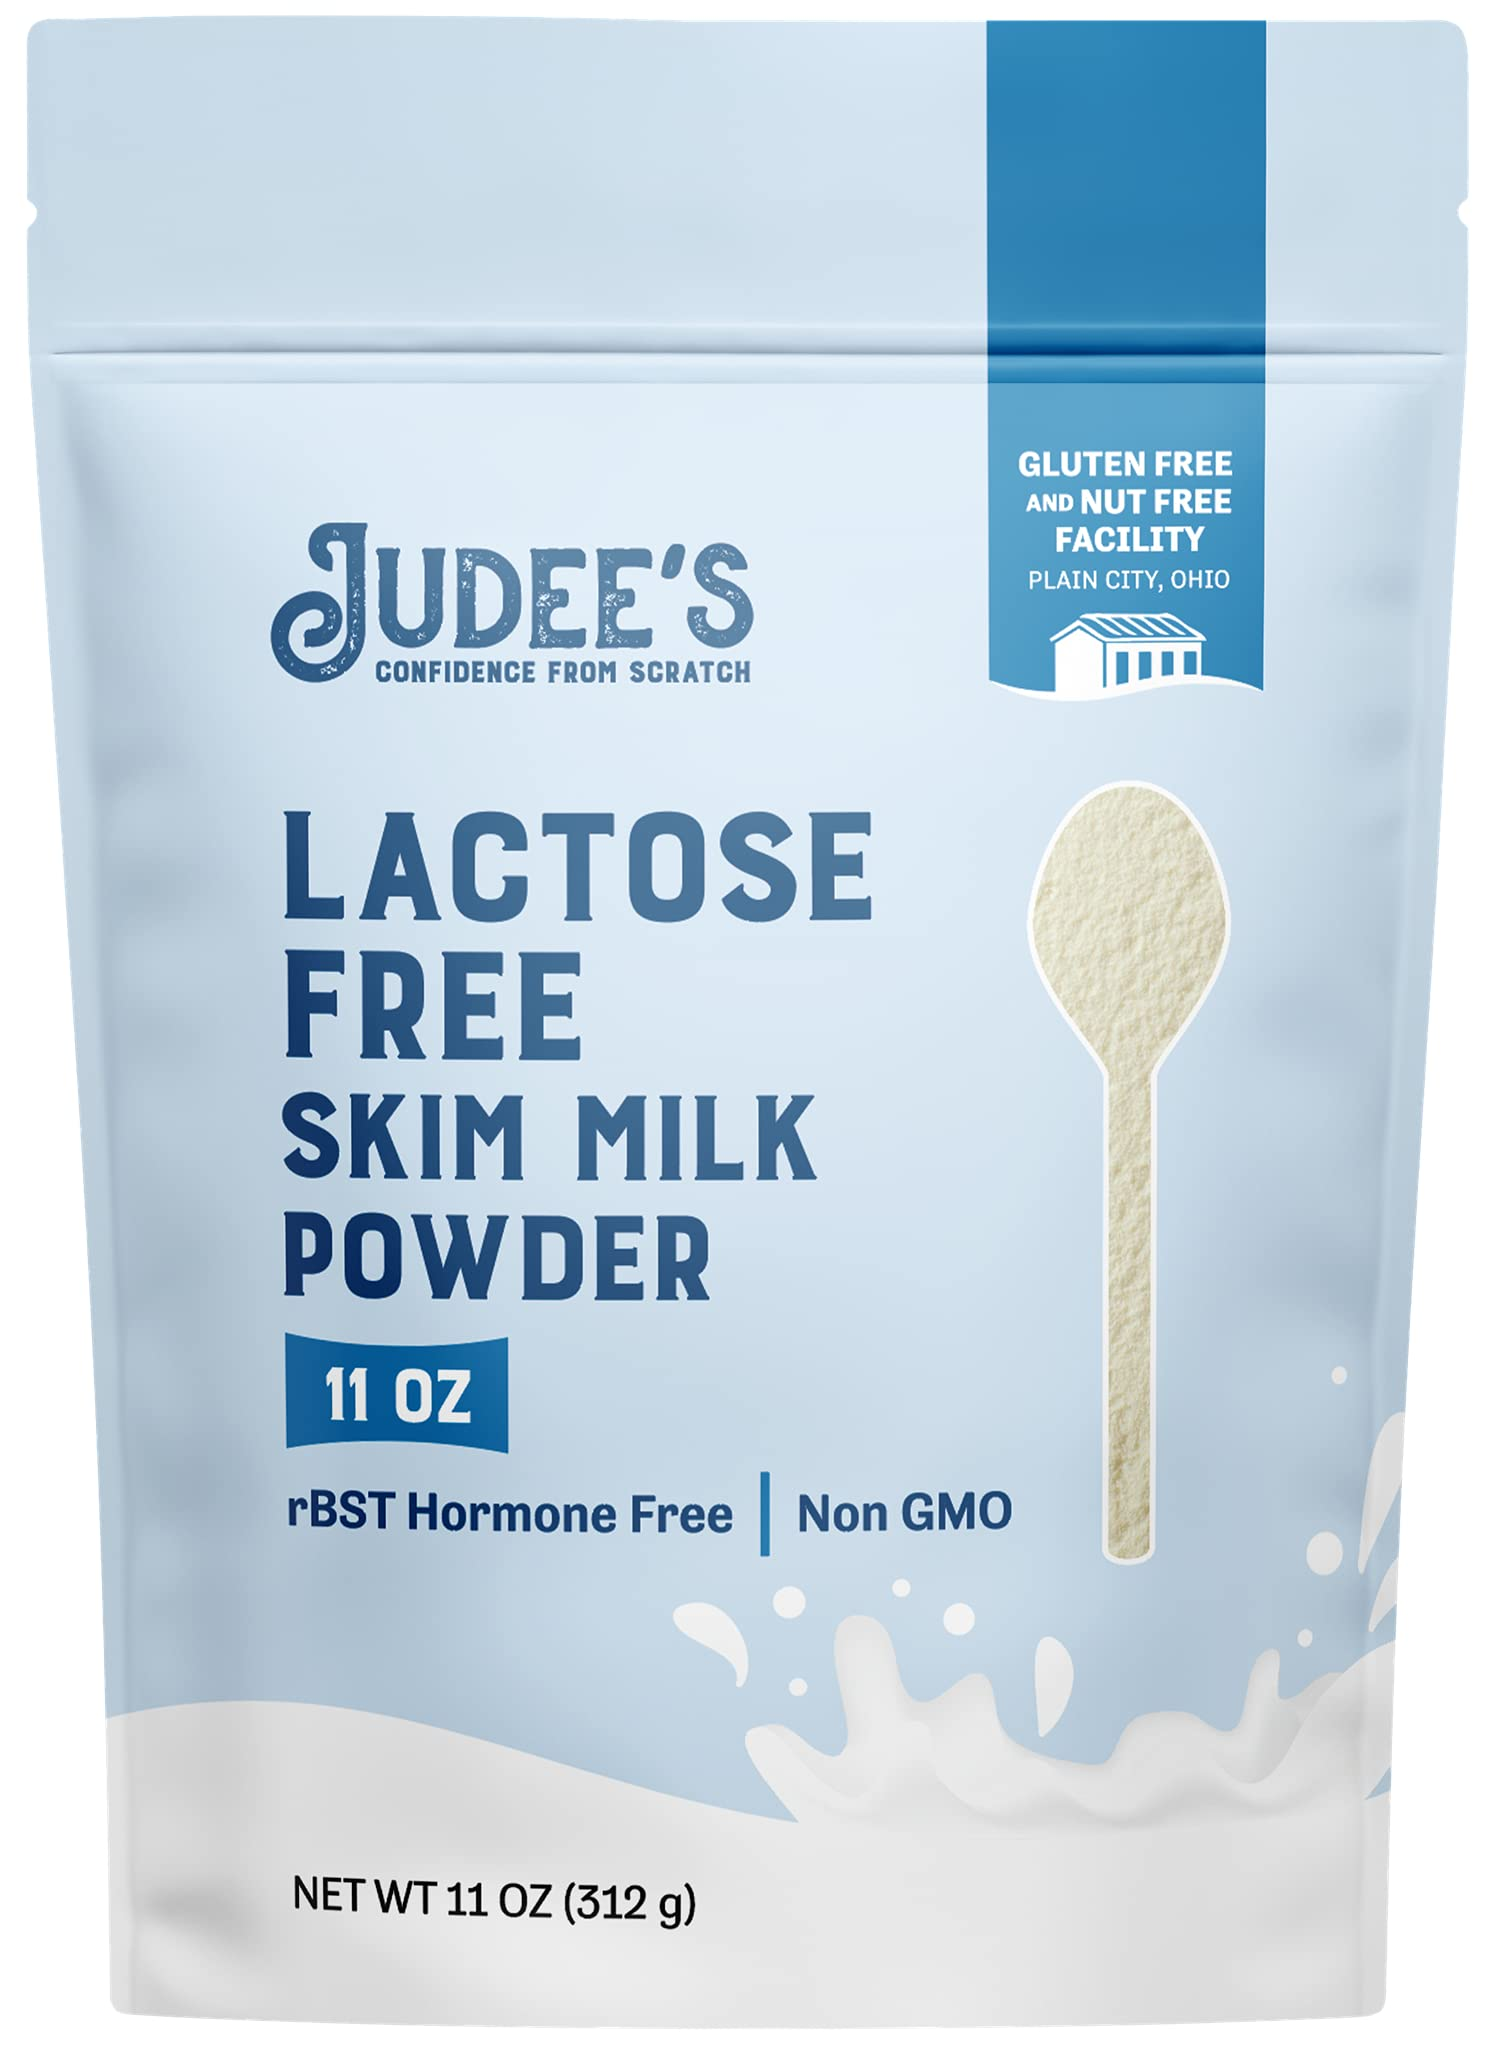 Lactose-Free Powdered Milk is an ideal choice for people who have problems digesting lactose